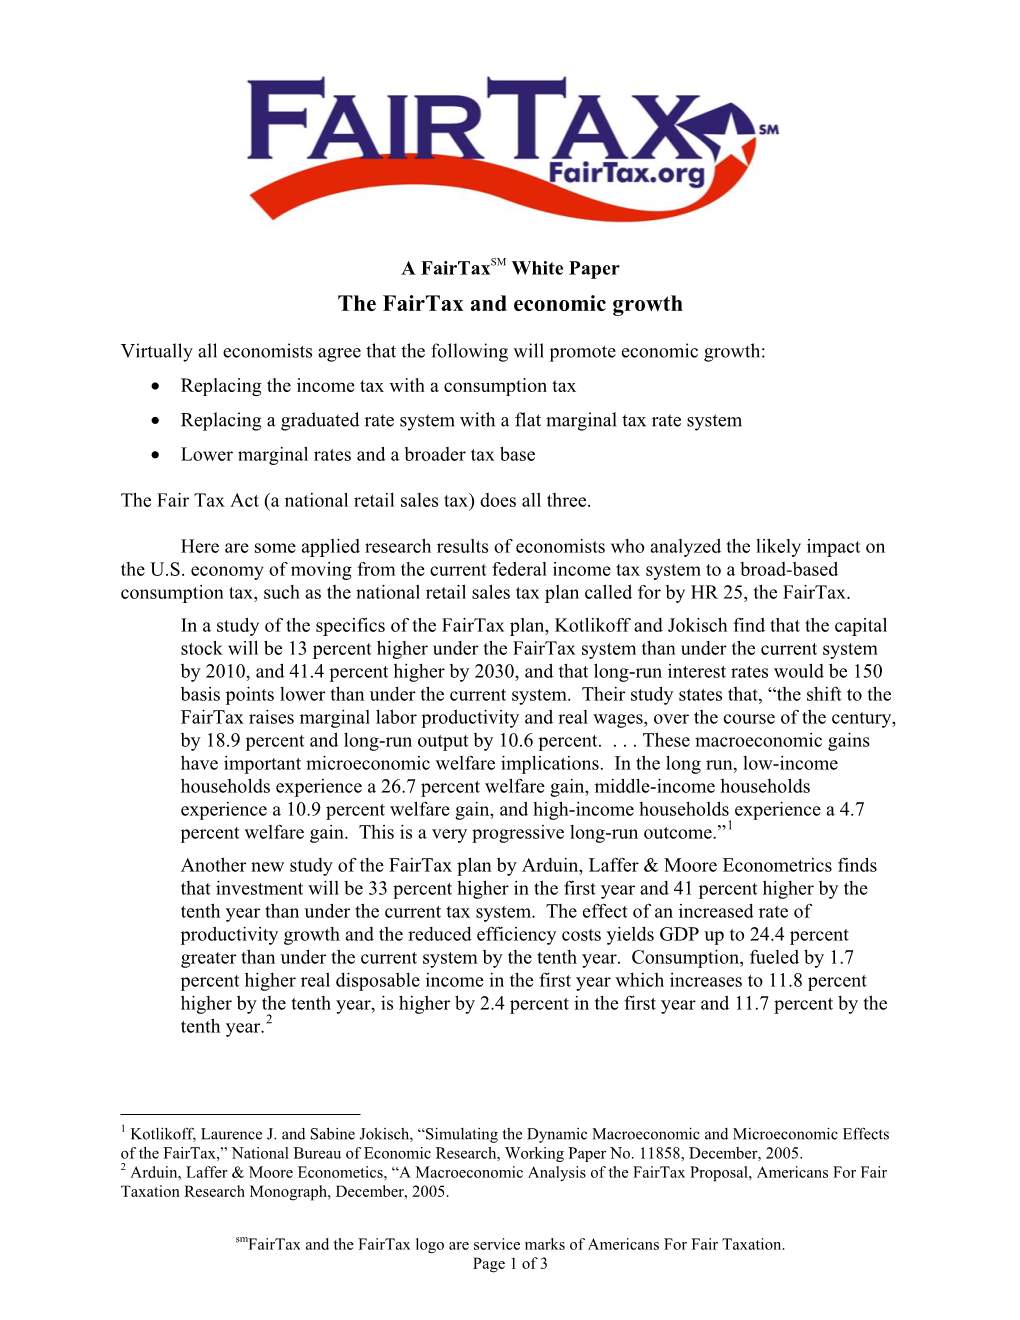 The Fairtax and Economic Growth